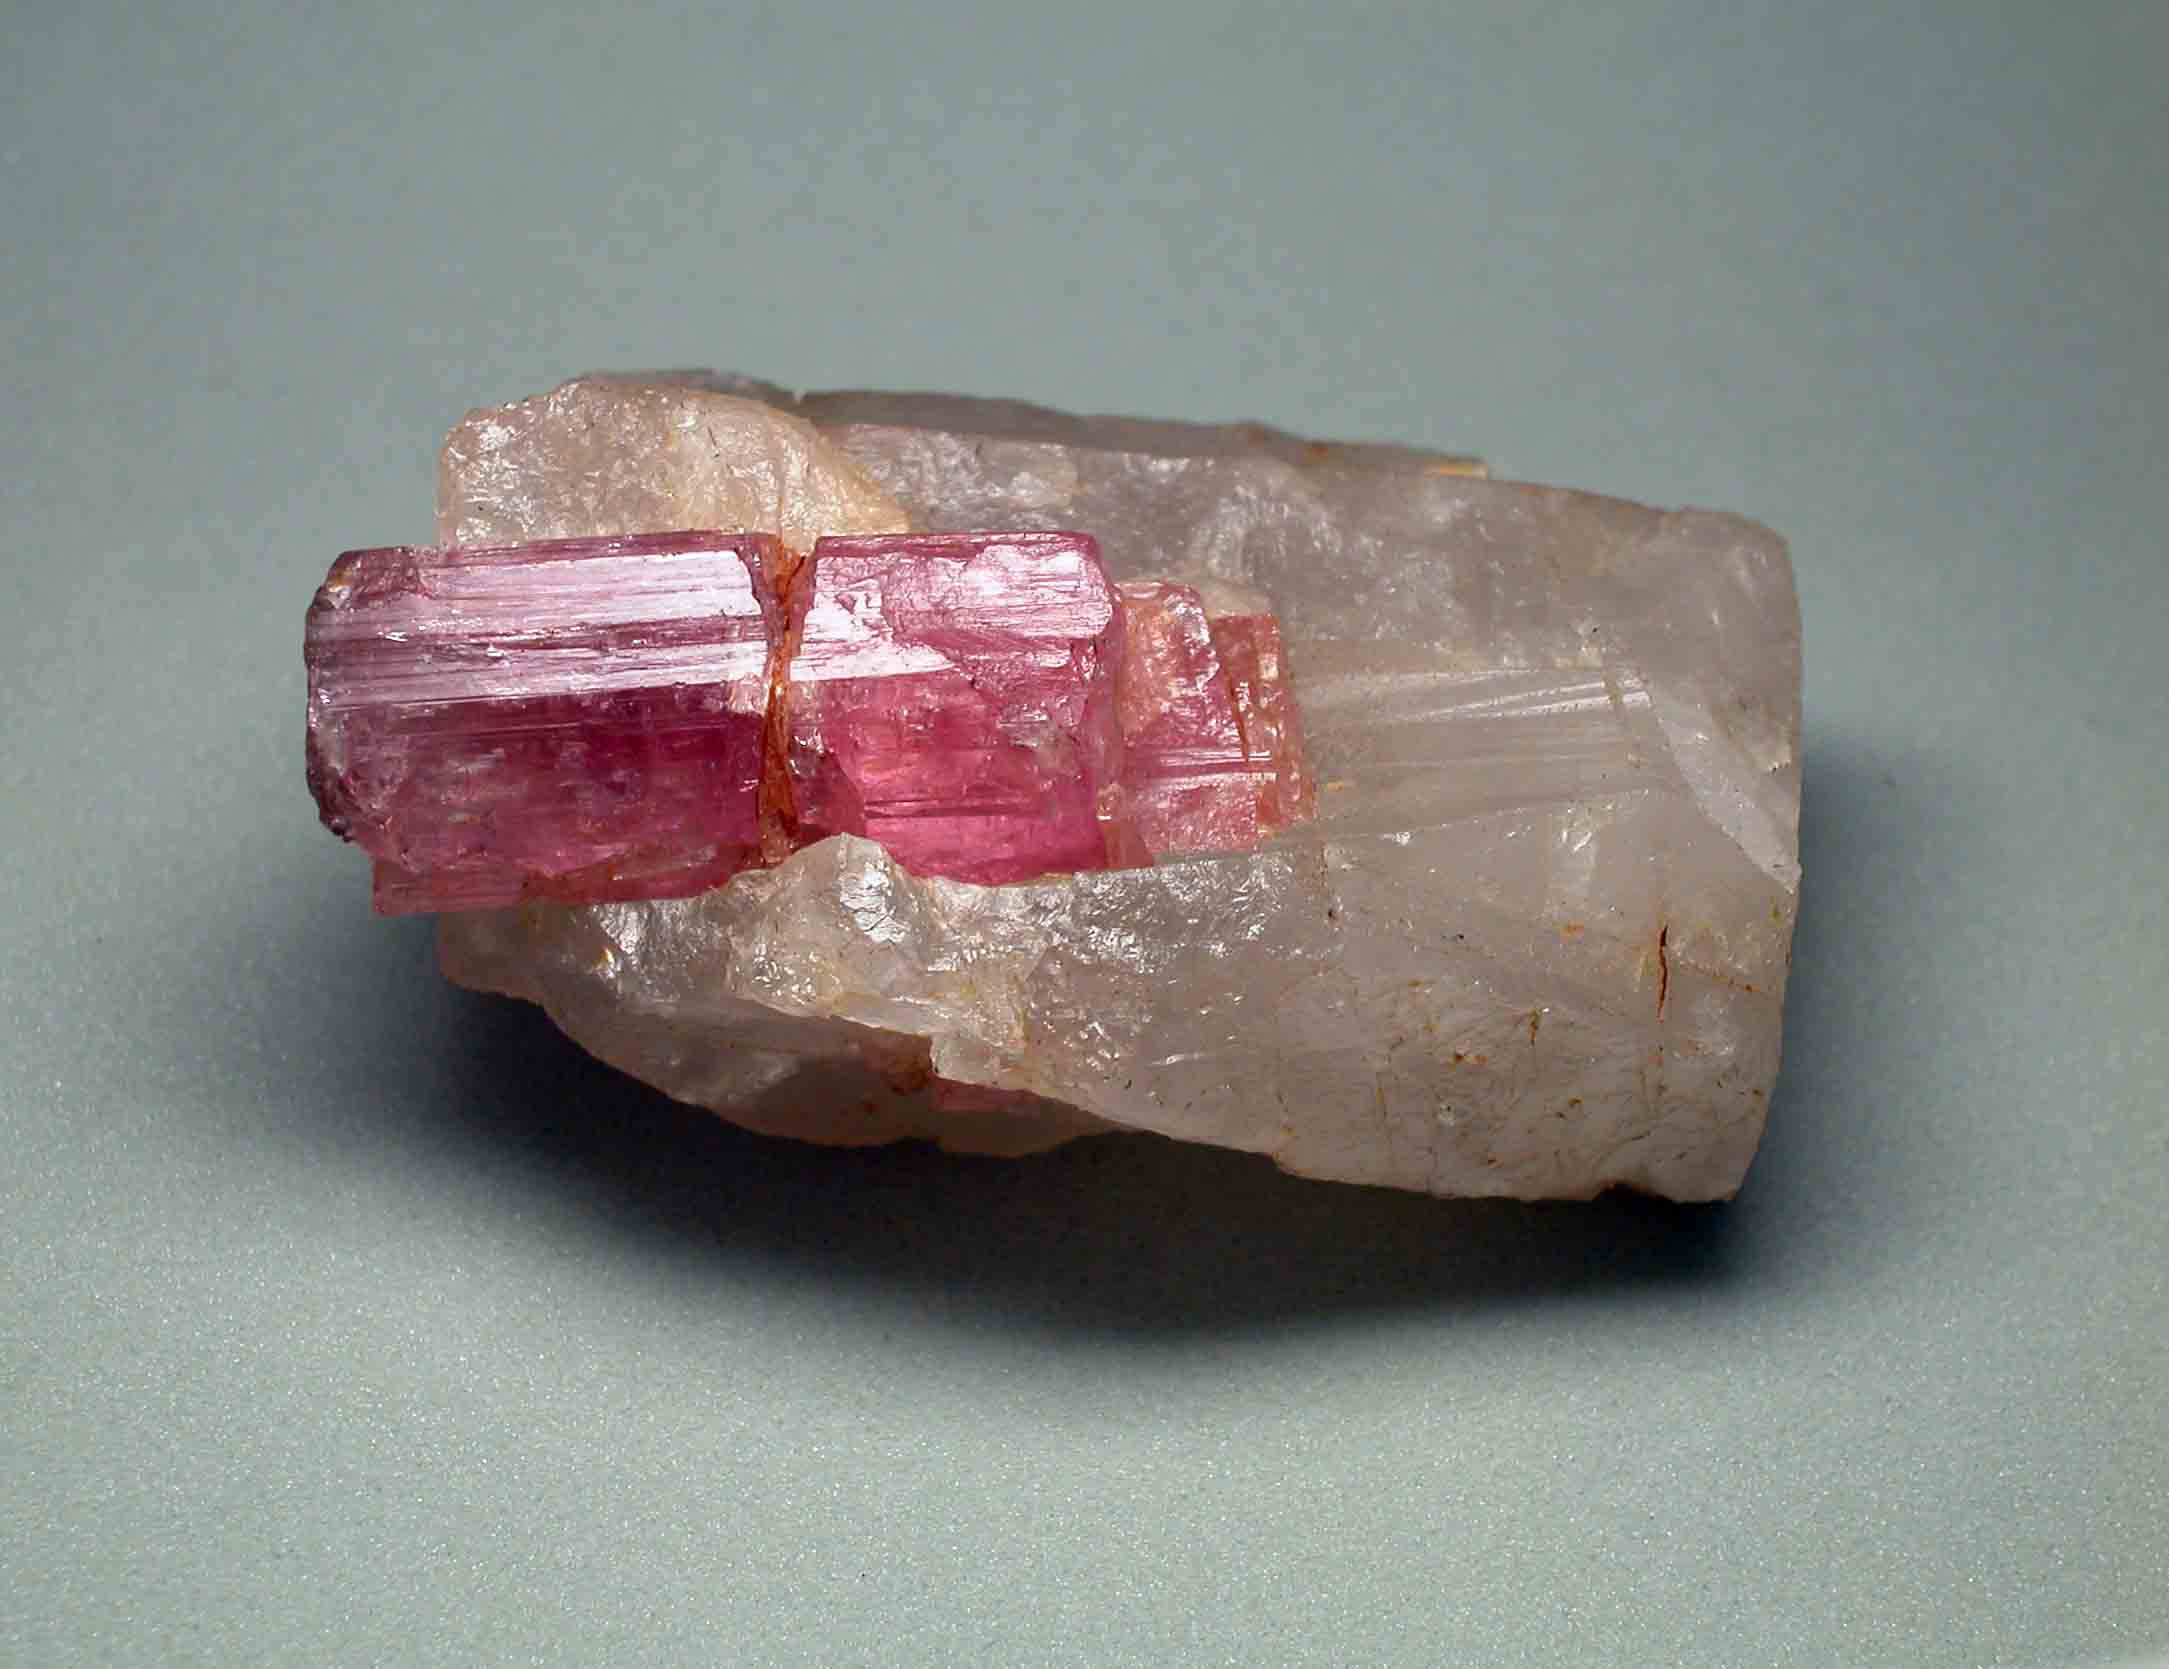 Buying Guide: What Are the Different Types of Tourmaline? - - Tourmaline